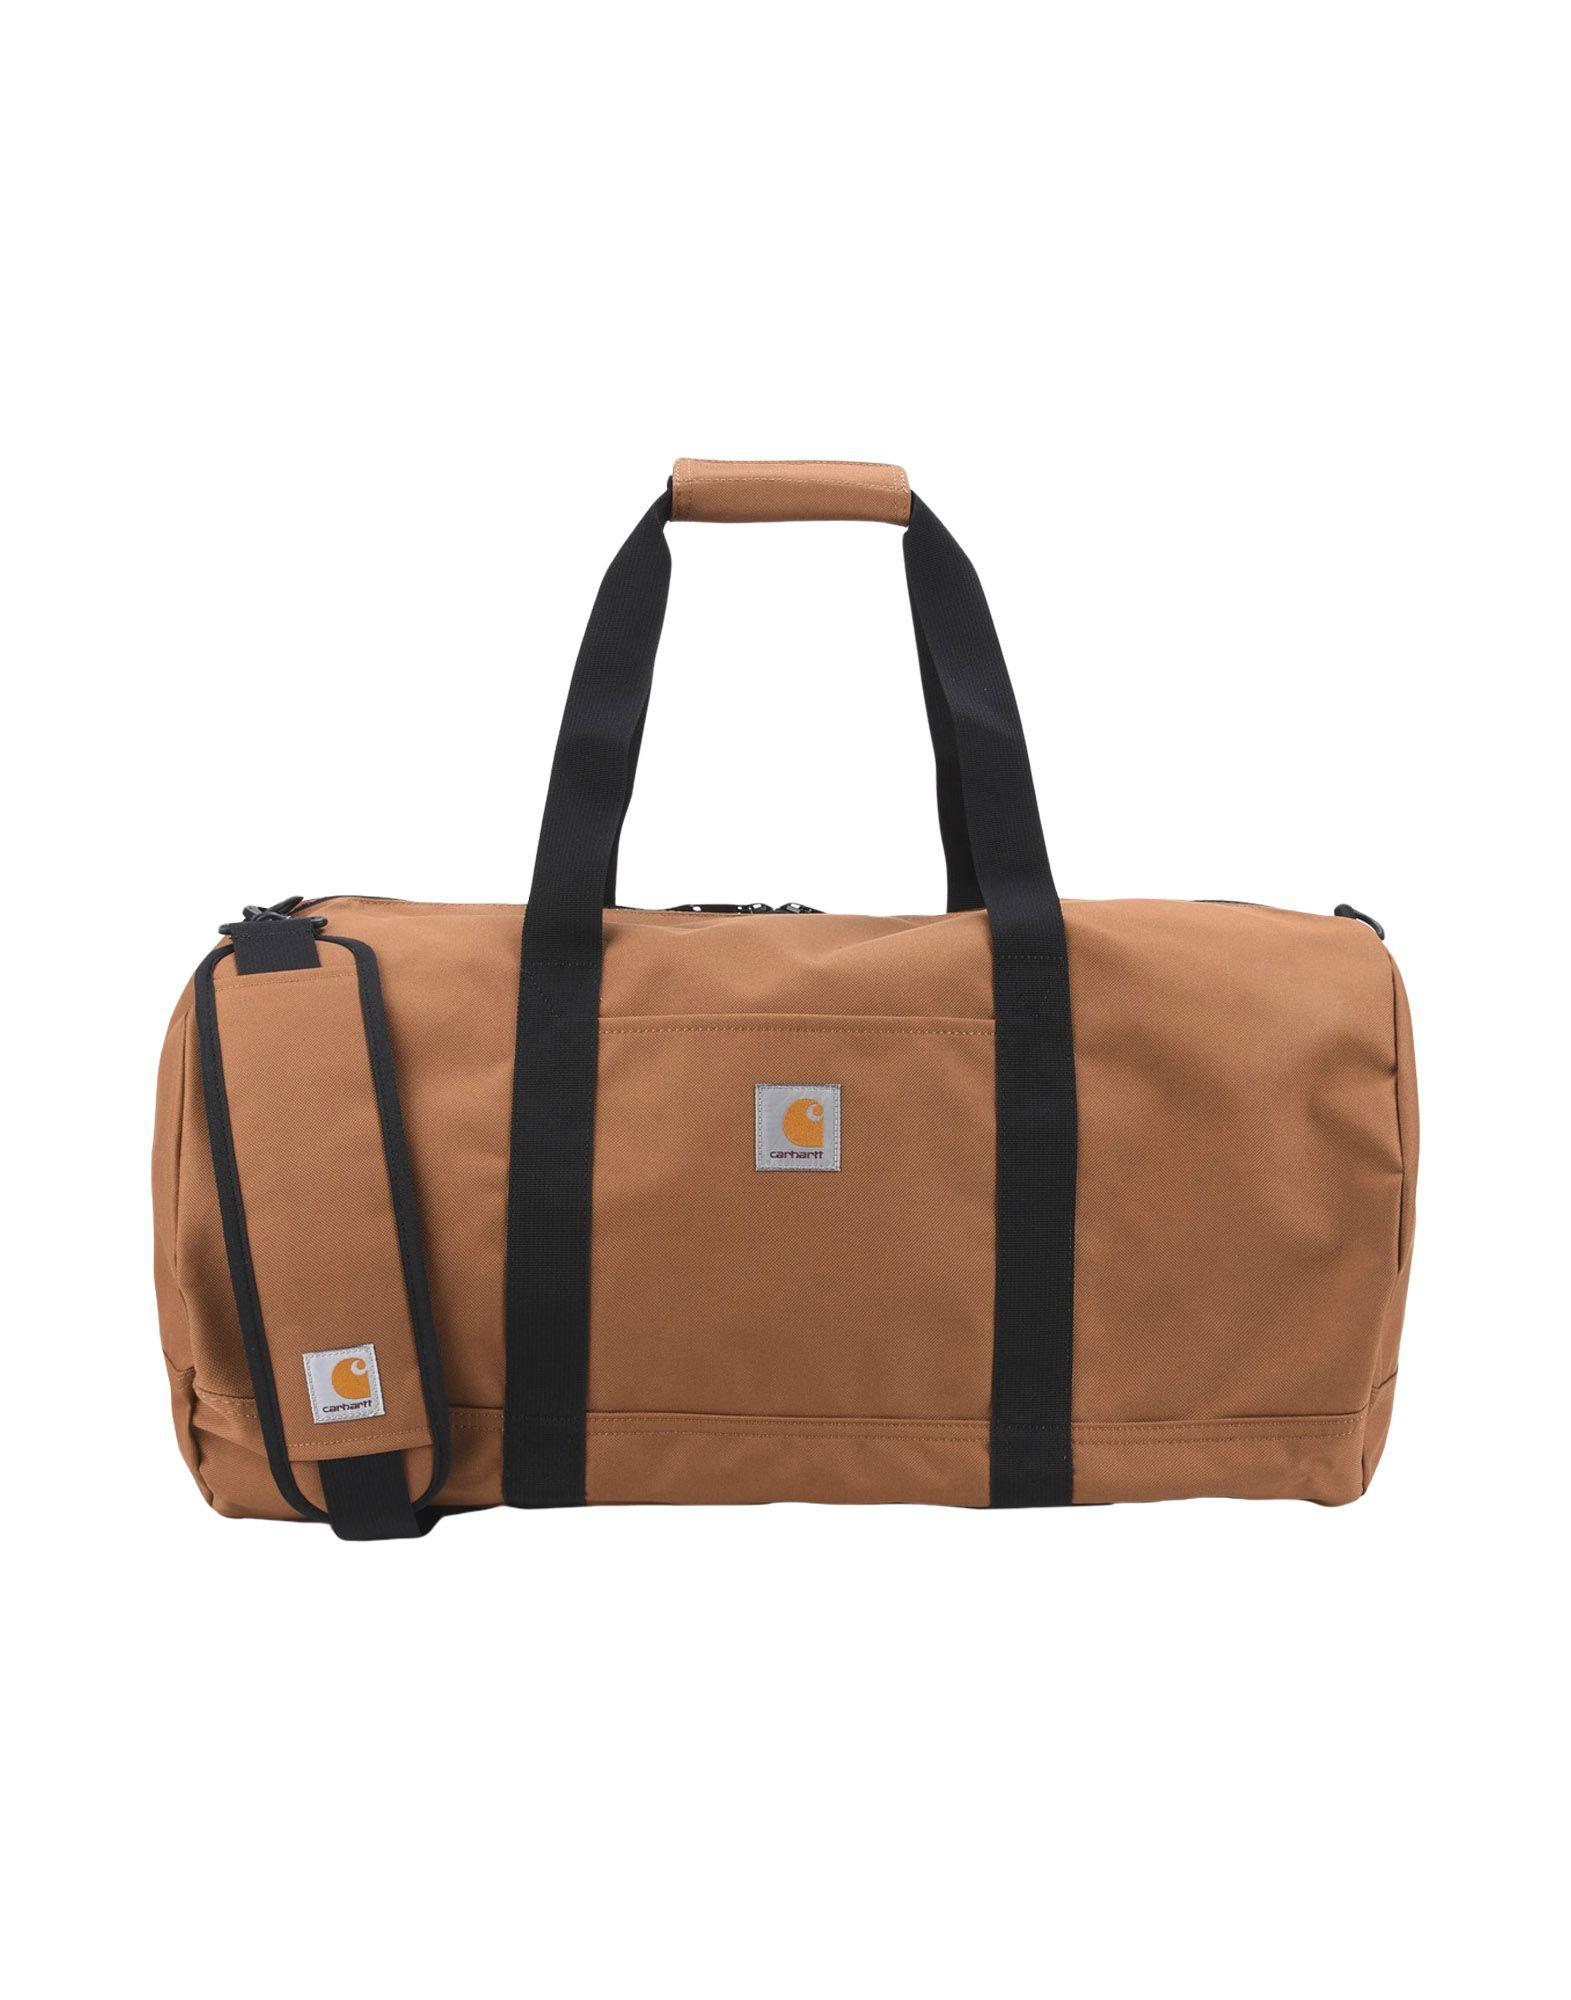 Carhartt Synthetic Travel & Duffel Bag in Camel (Brown) for Men - Lyst